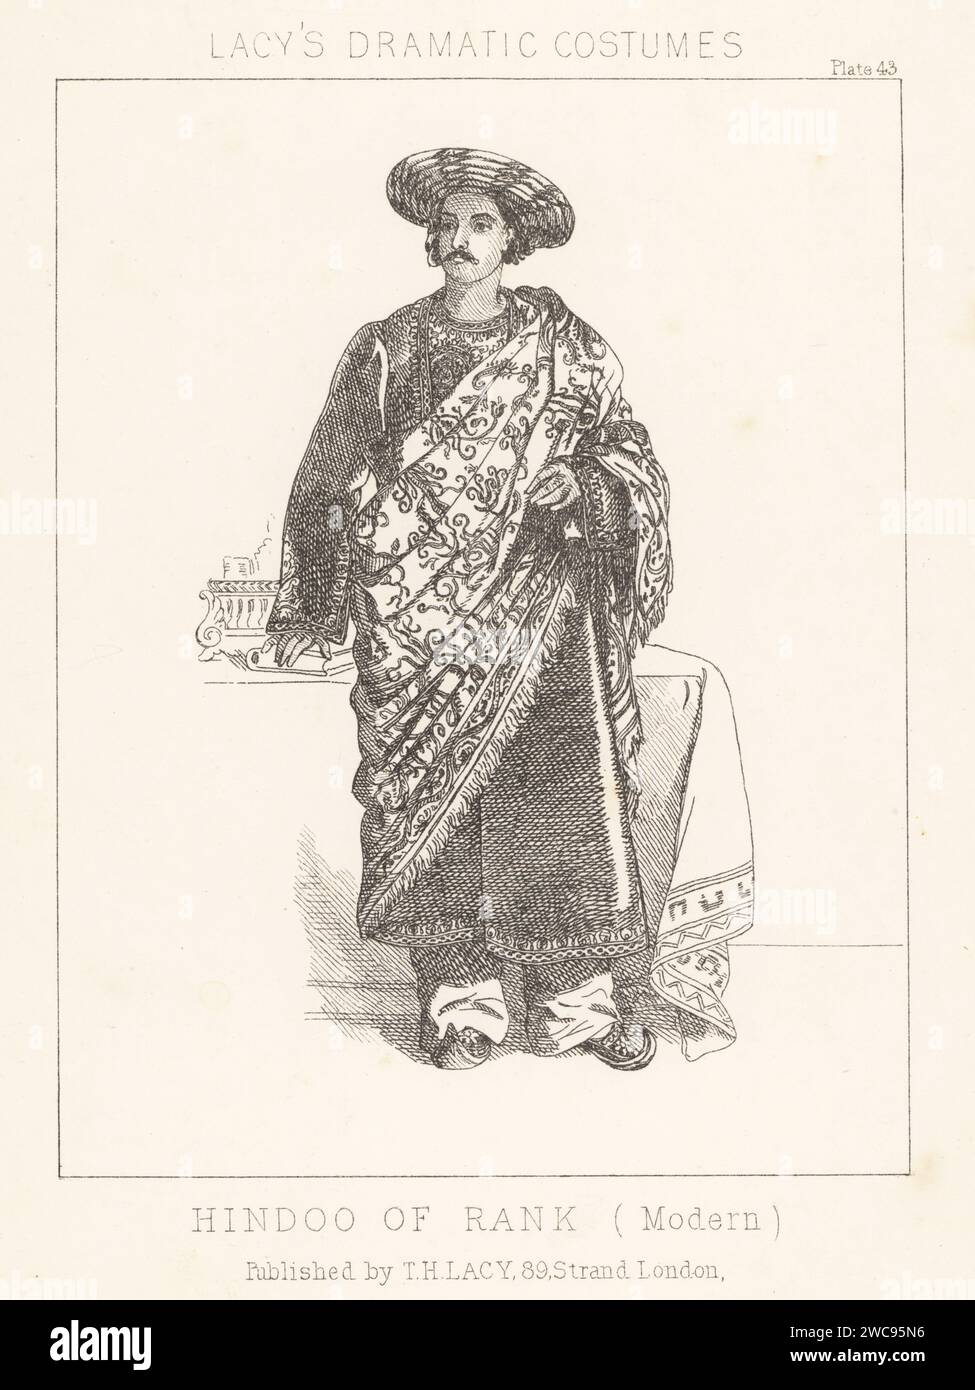 Costume of an Indian man, 19th century. In hat, robe, embroidered shawl, slippers. Hindoo of rank, modern. Lithograph from Thomas Hailes Lacy's Male Costumes, Historical, National and Dramatic in 200 Plates, London, 1865. Lacy (1809-1873) was a British actor, playwright, theatrical manager and publisher. Stock Photo